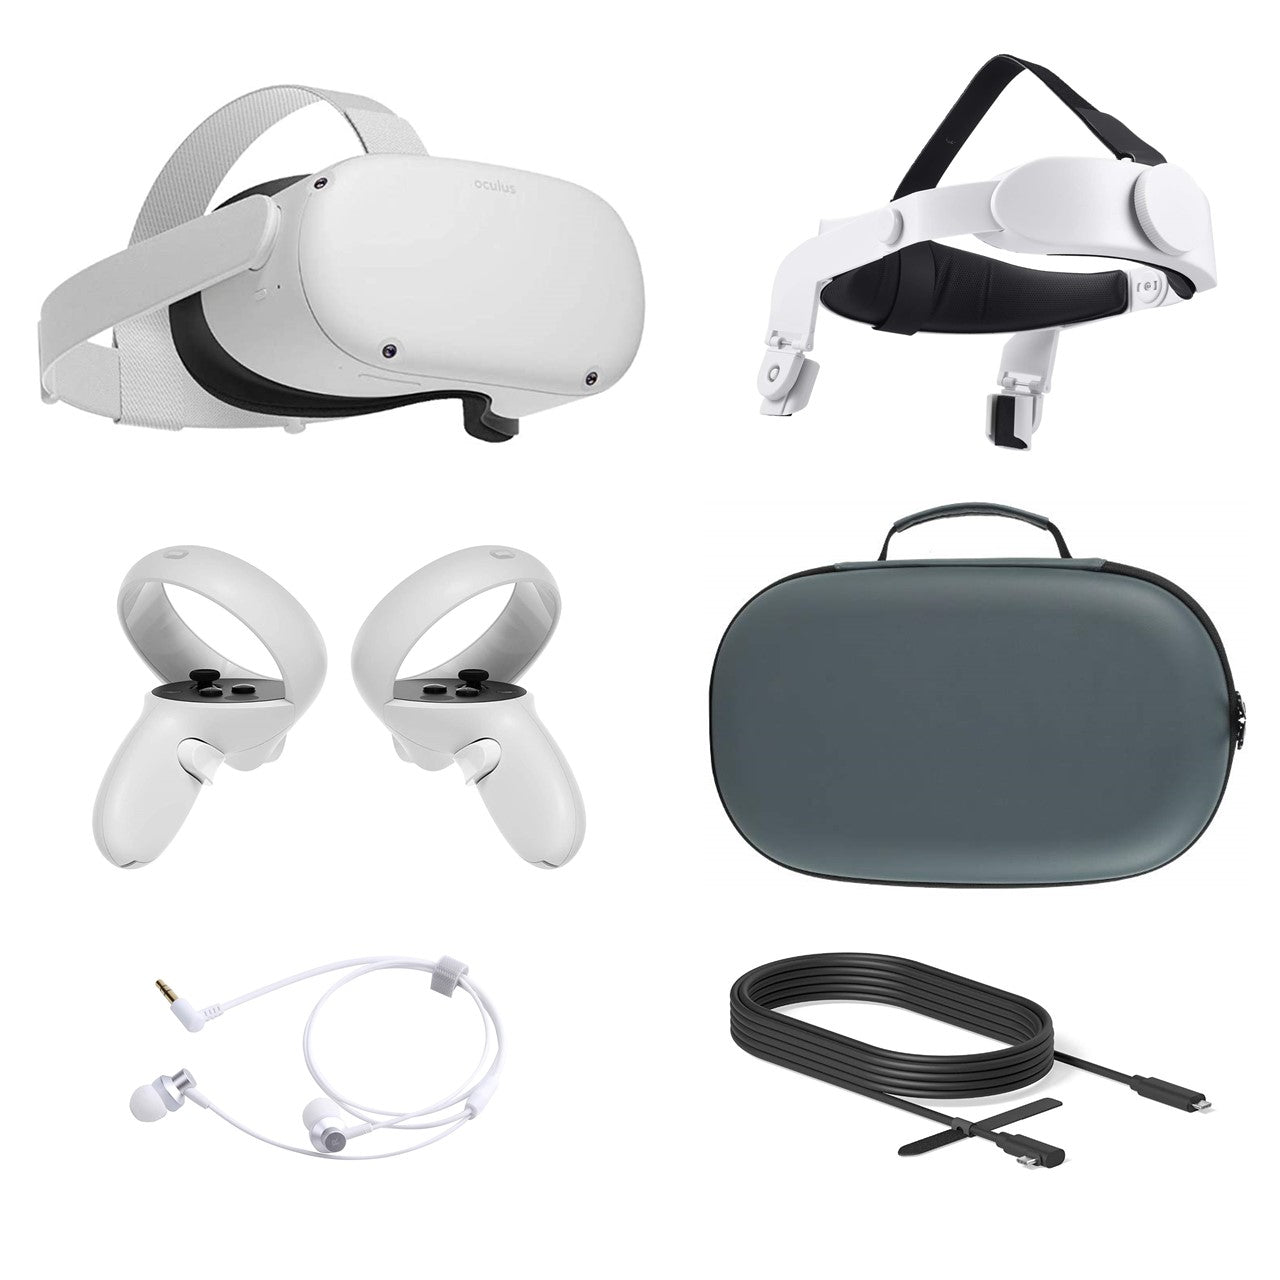 2021 Oculus Quest 2 All-In-One VR Headset, Touch Controllers, 128GB SSD, Glasses Compatible, 3D Audio, Mytrix Head Strap, Carrying Case, Earphone, Link Cable (3M)